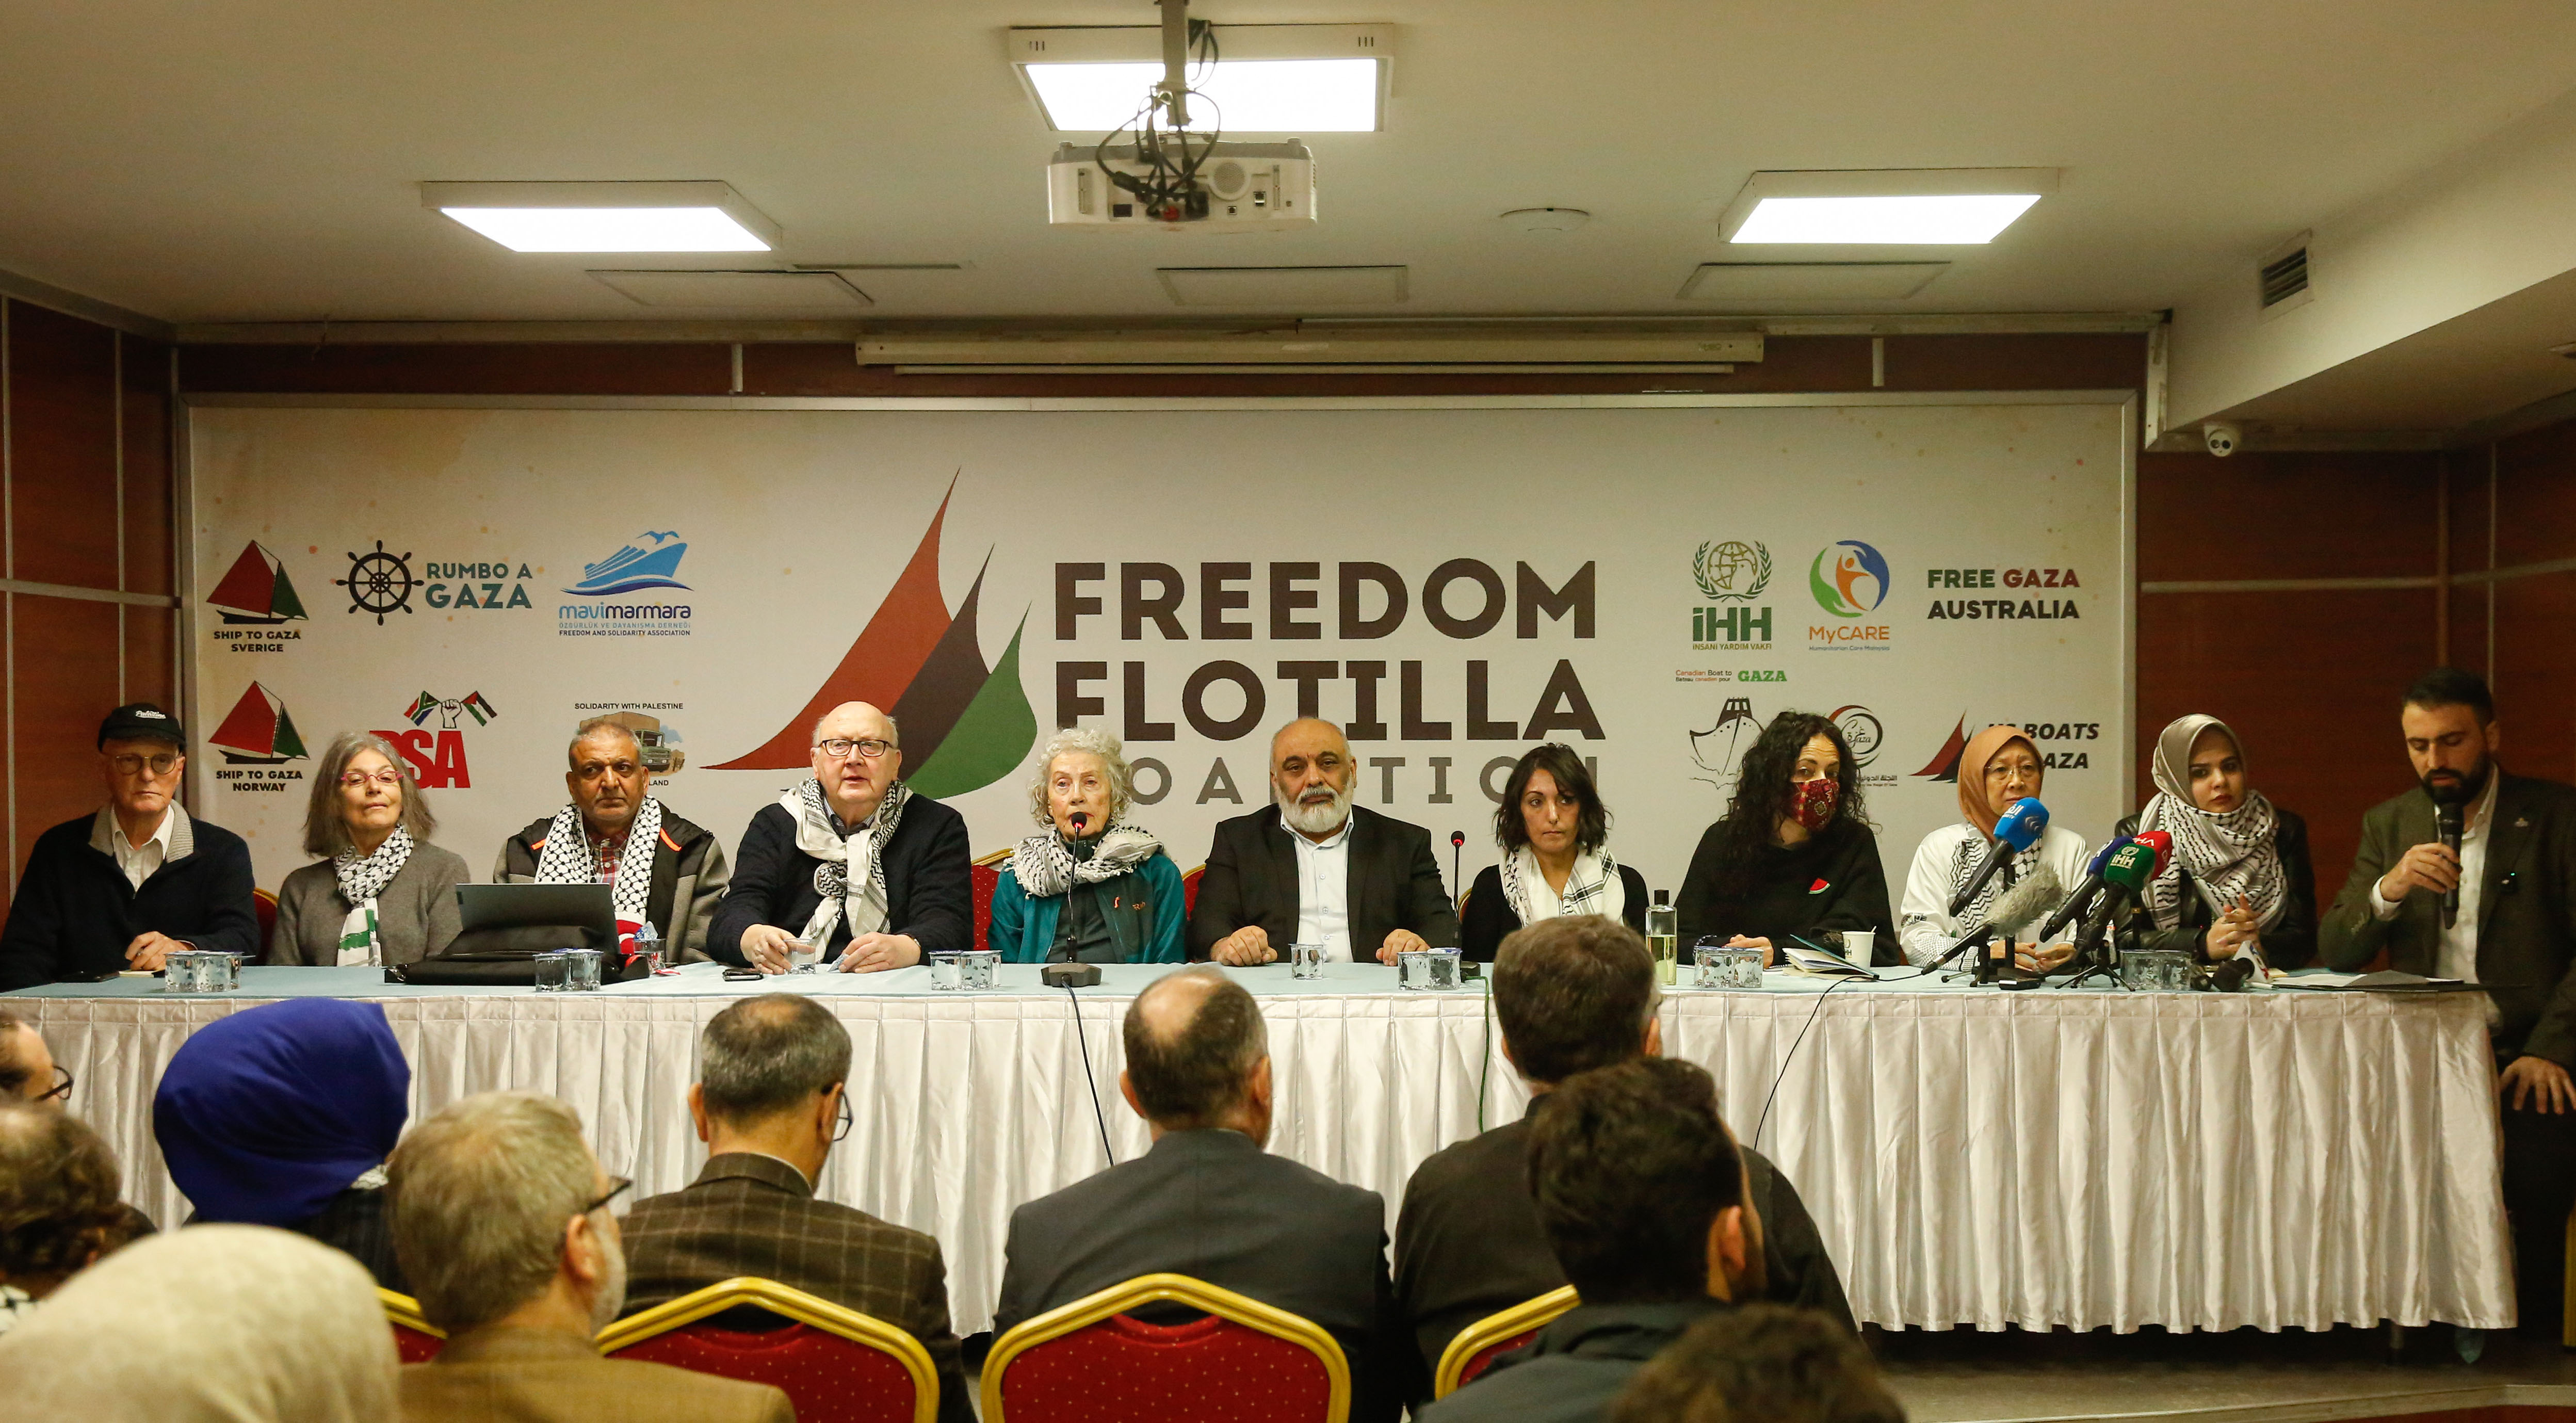 The Freedom Flotilla Coalition aims to sail at the end of March